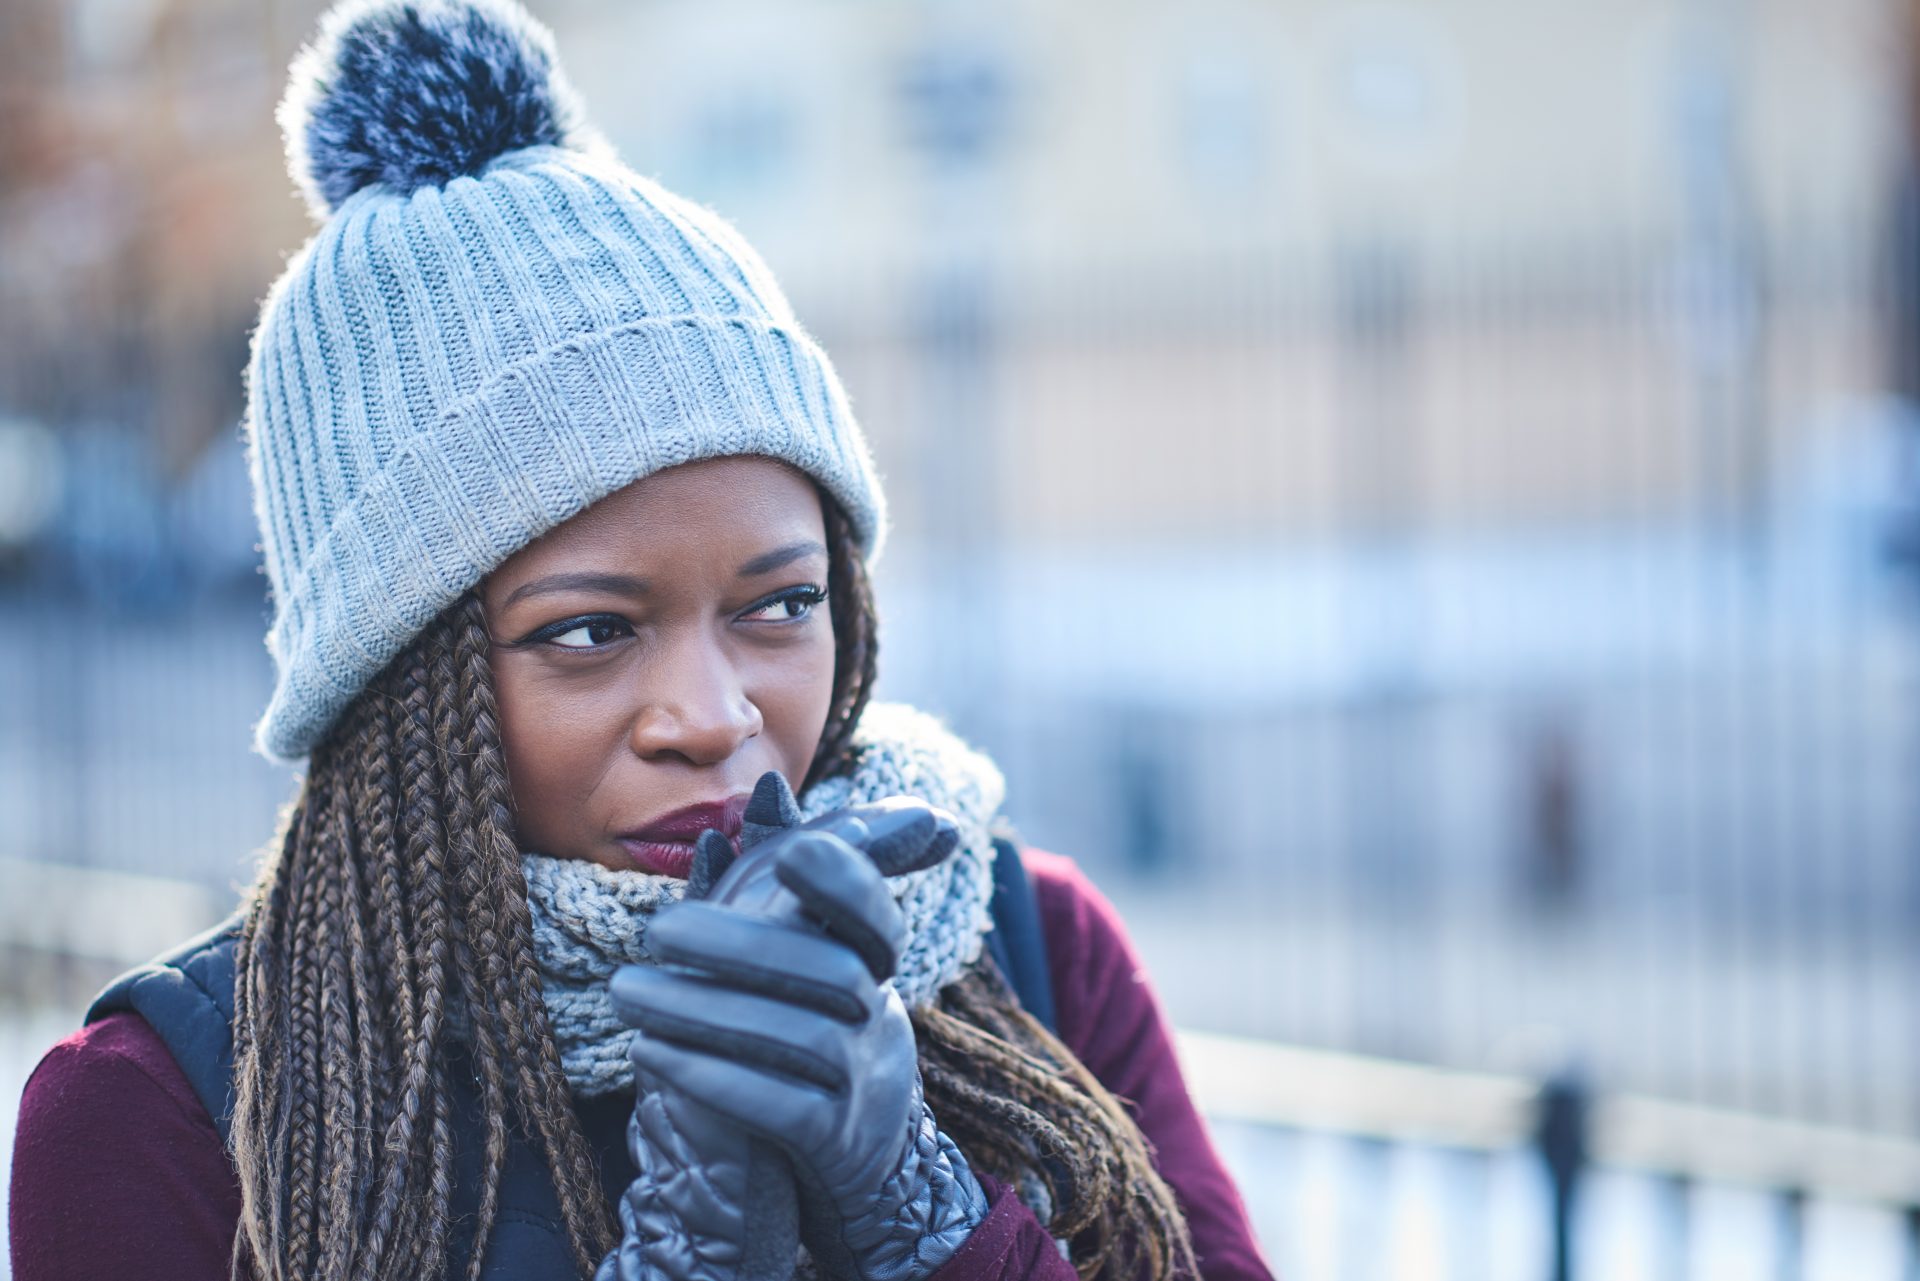 Feeling cold: why some people feel cold all the time